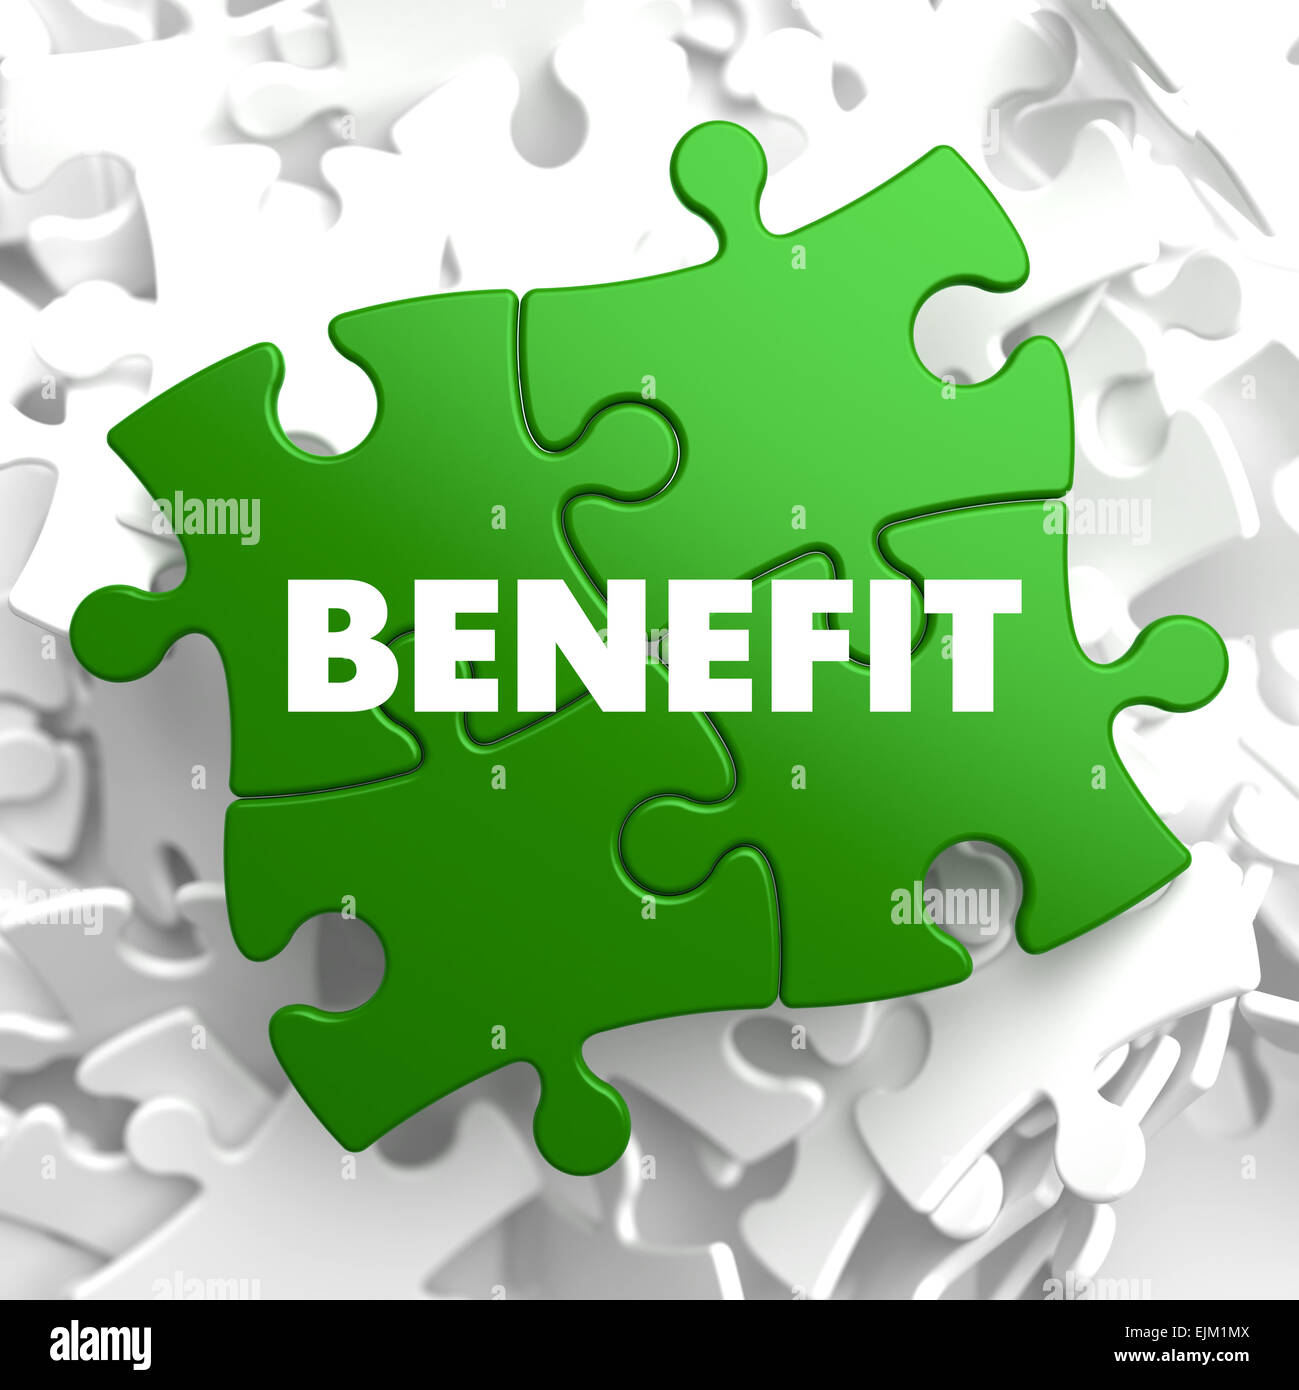 Benefit on Green Puzzle. Stock Photo